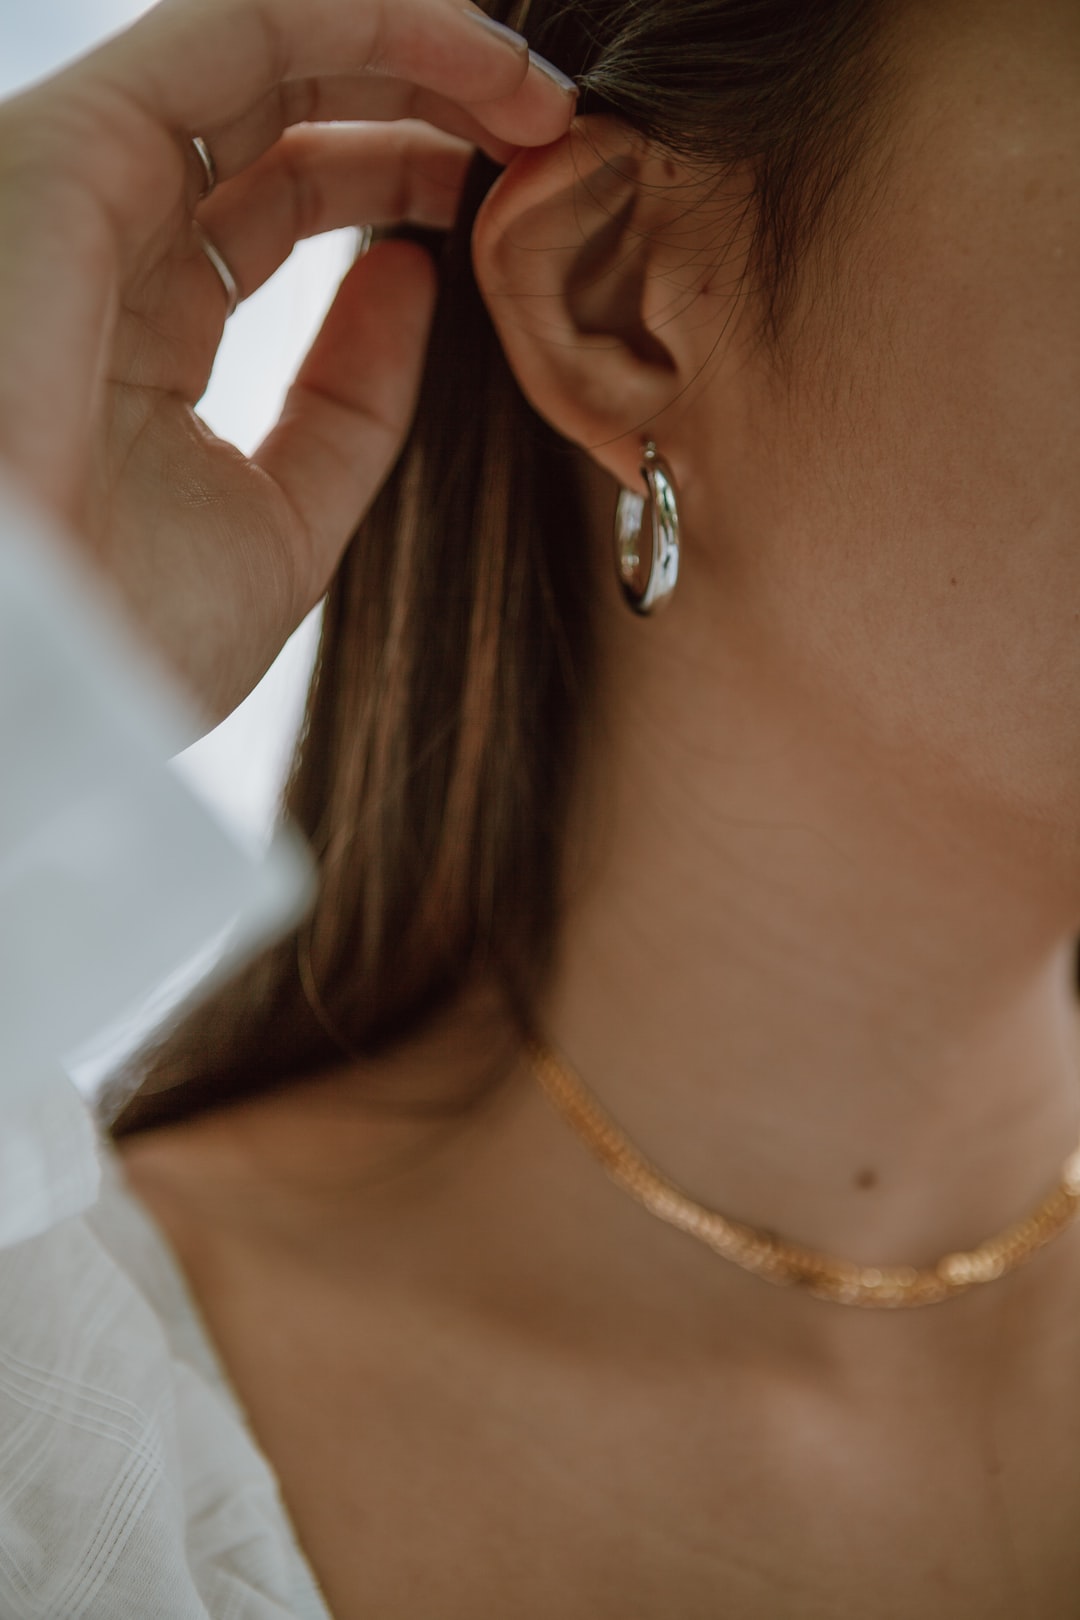 Can You Wear Gold and Silver Jewelry at the Same Time?